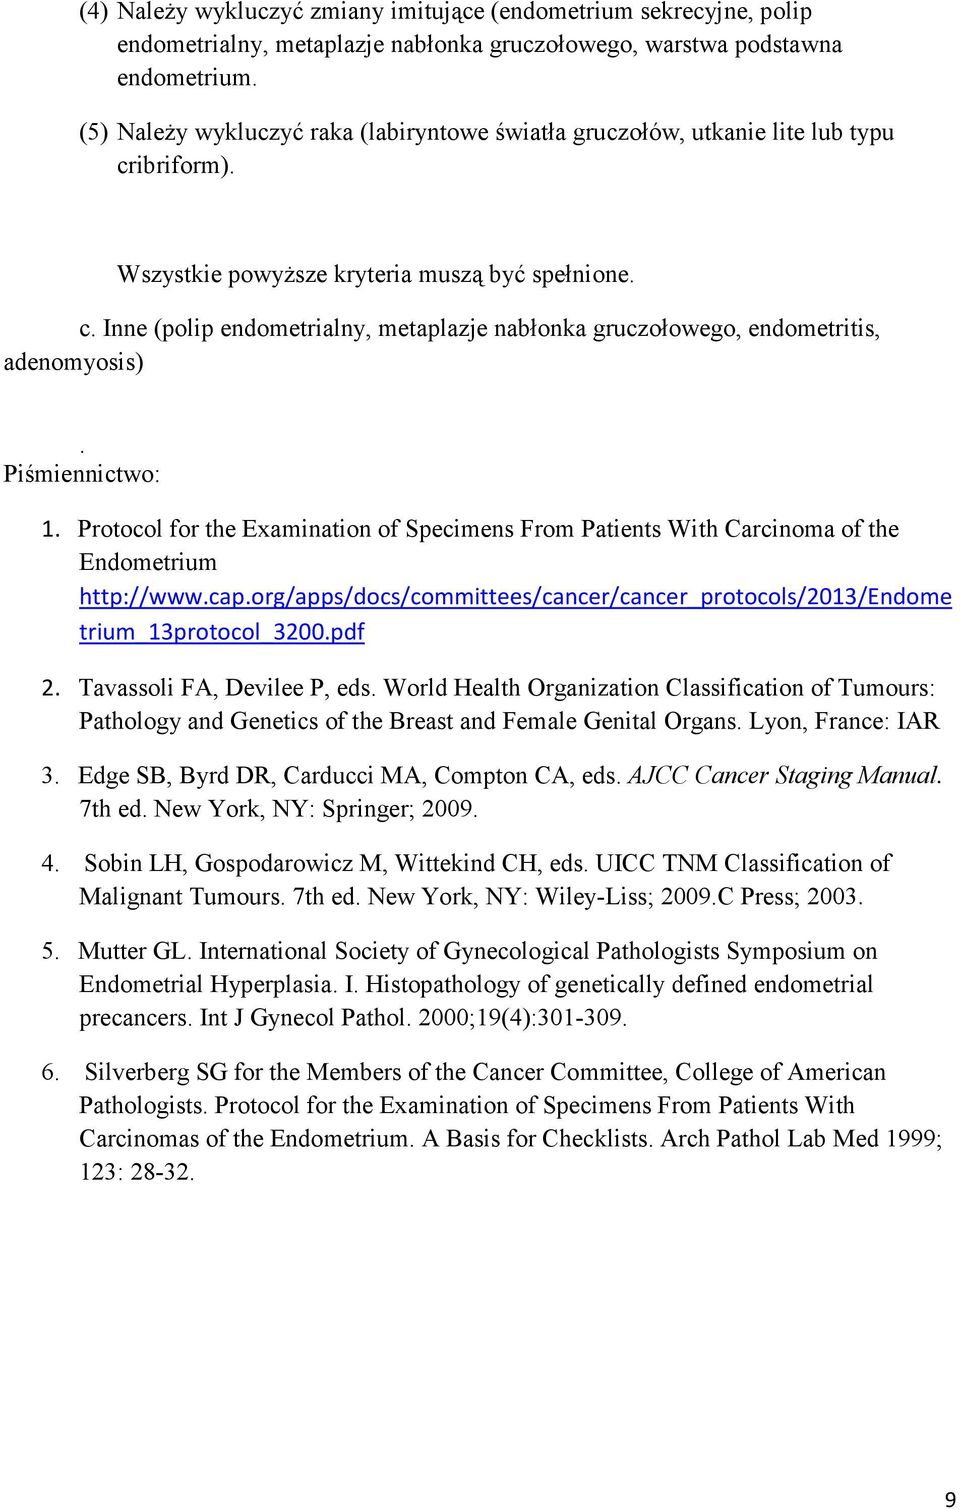 Piśmiennictwo: 1. Protocol for the Examination of Specimens From Patients With Carcinoma of the Endometrium http://www.cap.